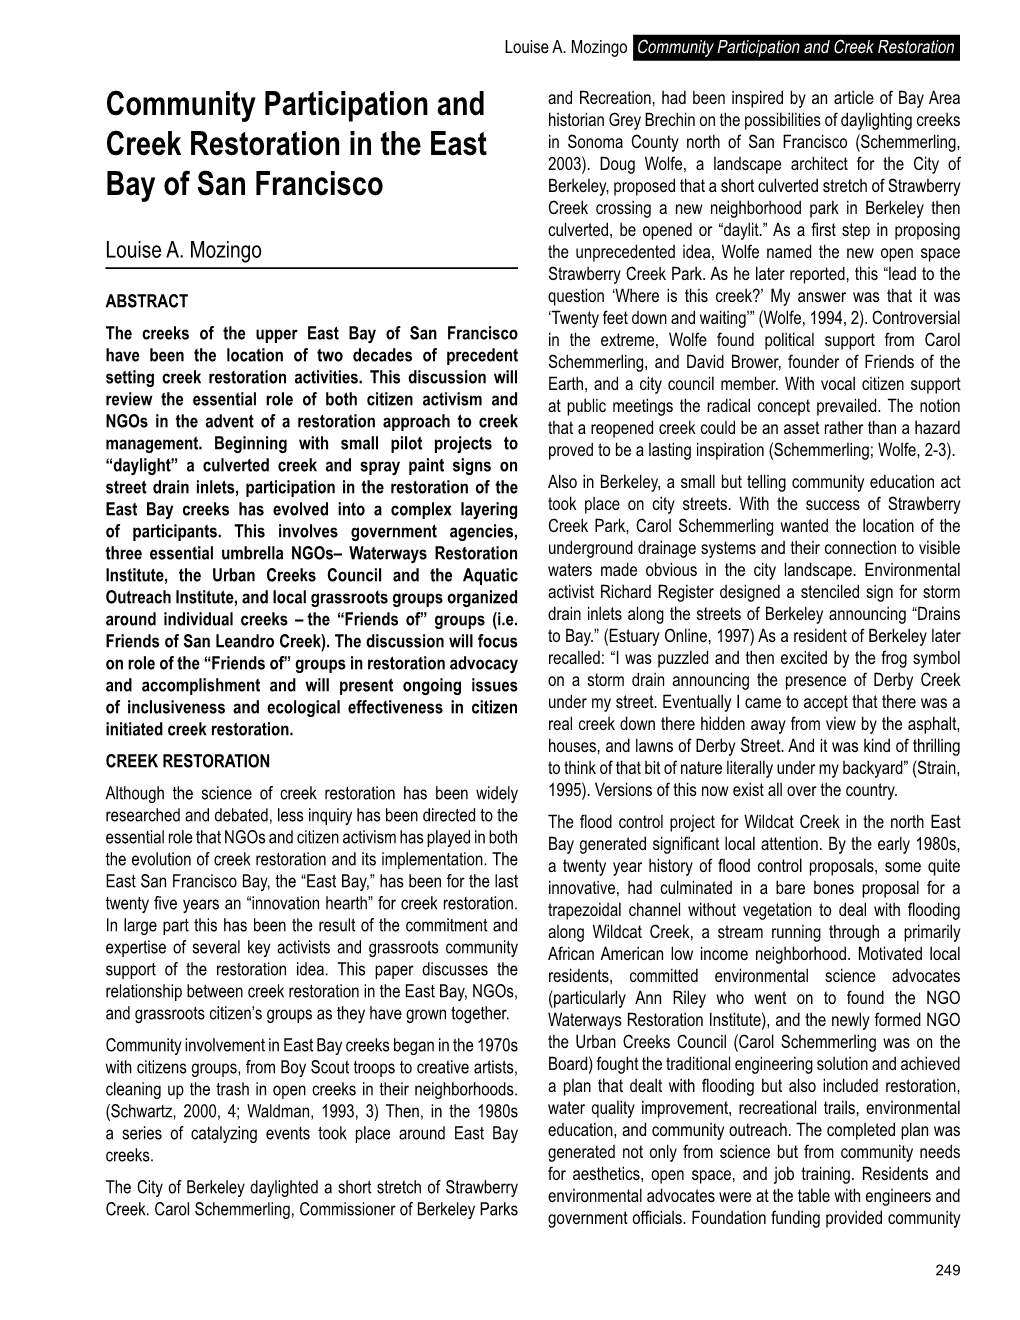 Community Participation and Creek Restoration in the East Bay of San Francisco